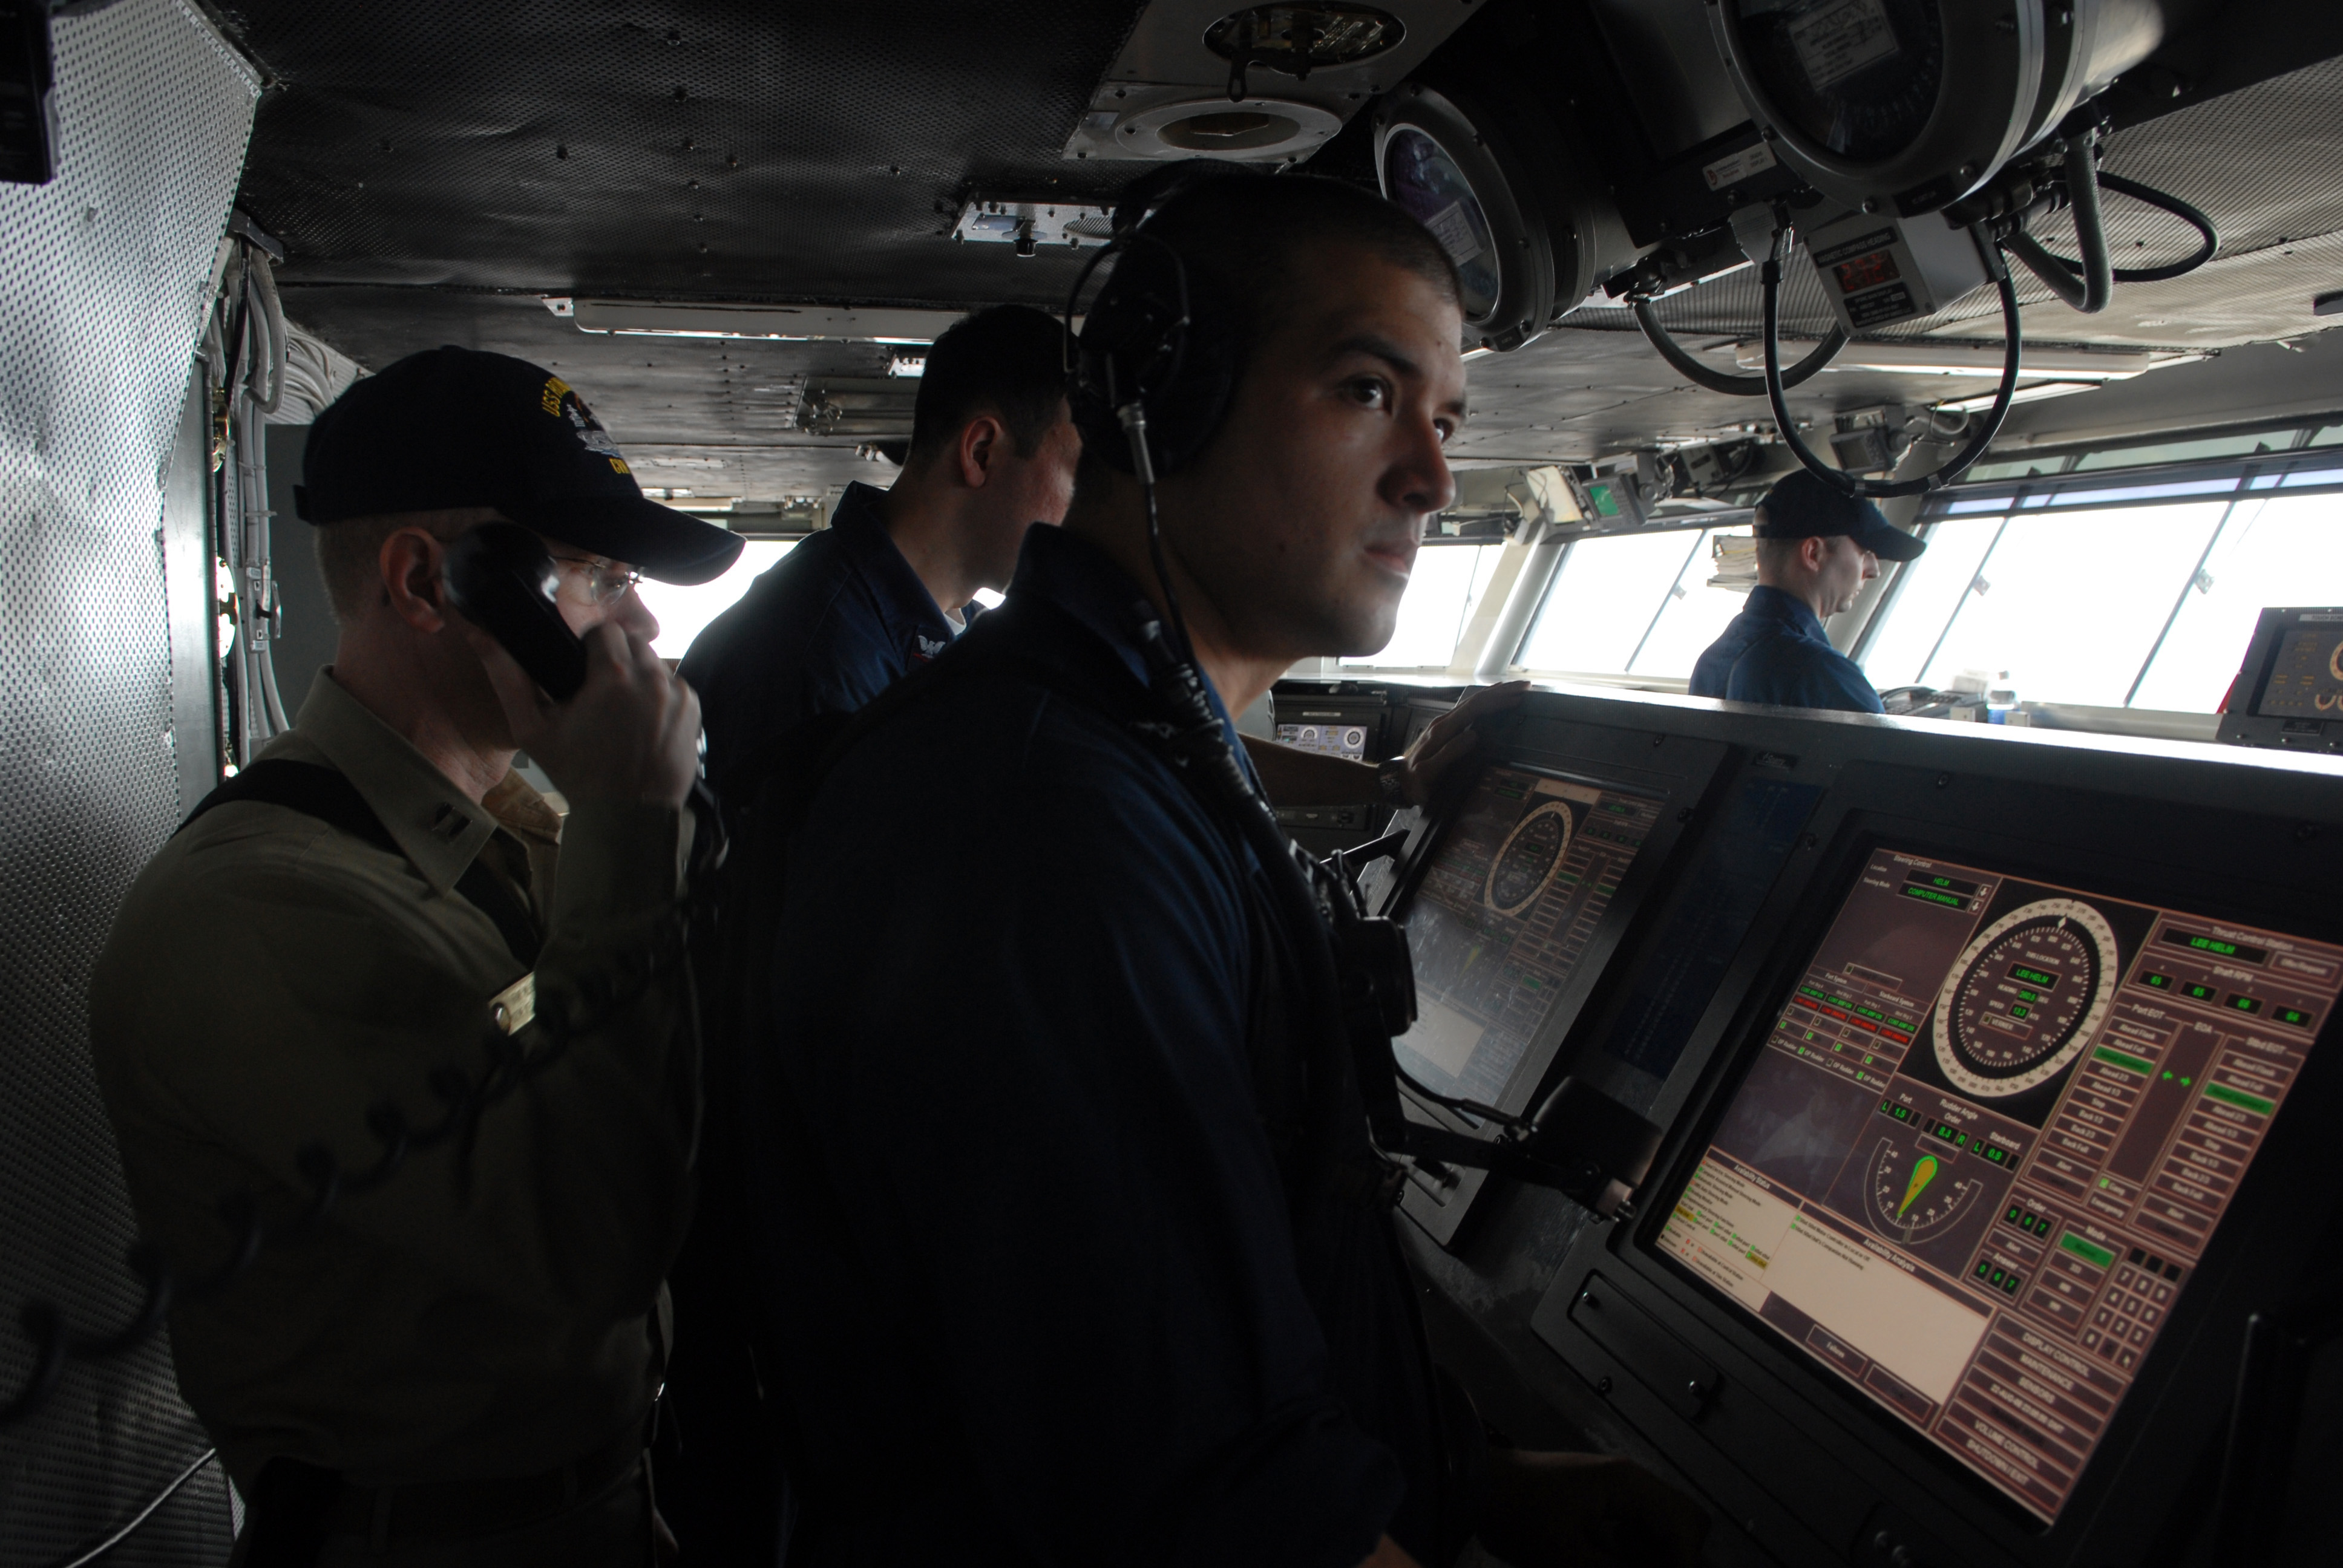 US_Navy_080823-N-1635S-003_Watch_standers_man_the_helm_on_the_bridge_of_the_Nimitz-class_aircraft_carrier_USS_Ronald_Reagan_(CVN_76)_during_a_replenishment_at_sea_with_the_Military_Sealift_Command_fast_combat_support_ship_USNS.jpg